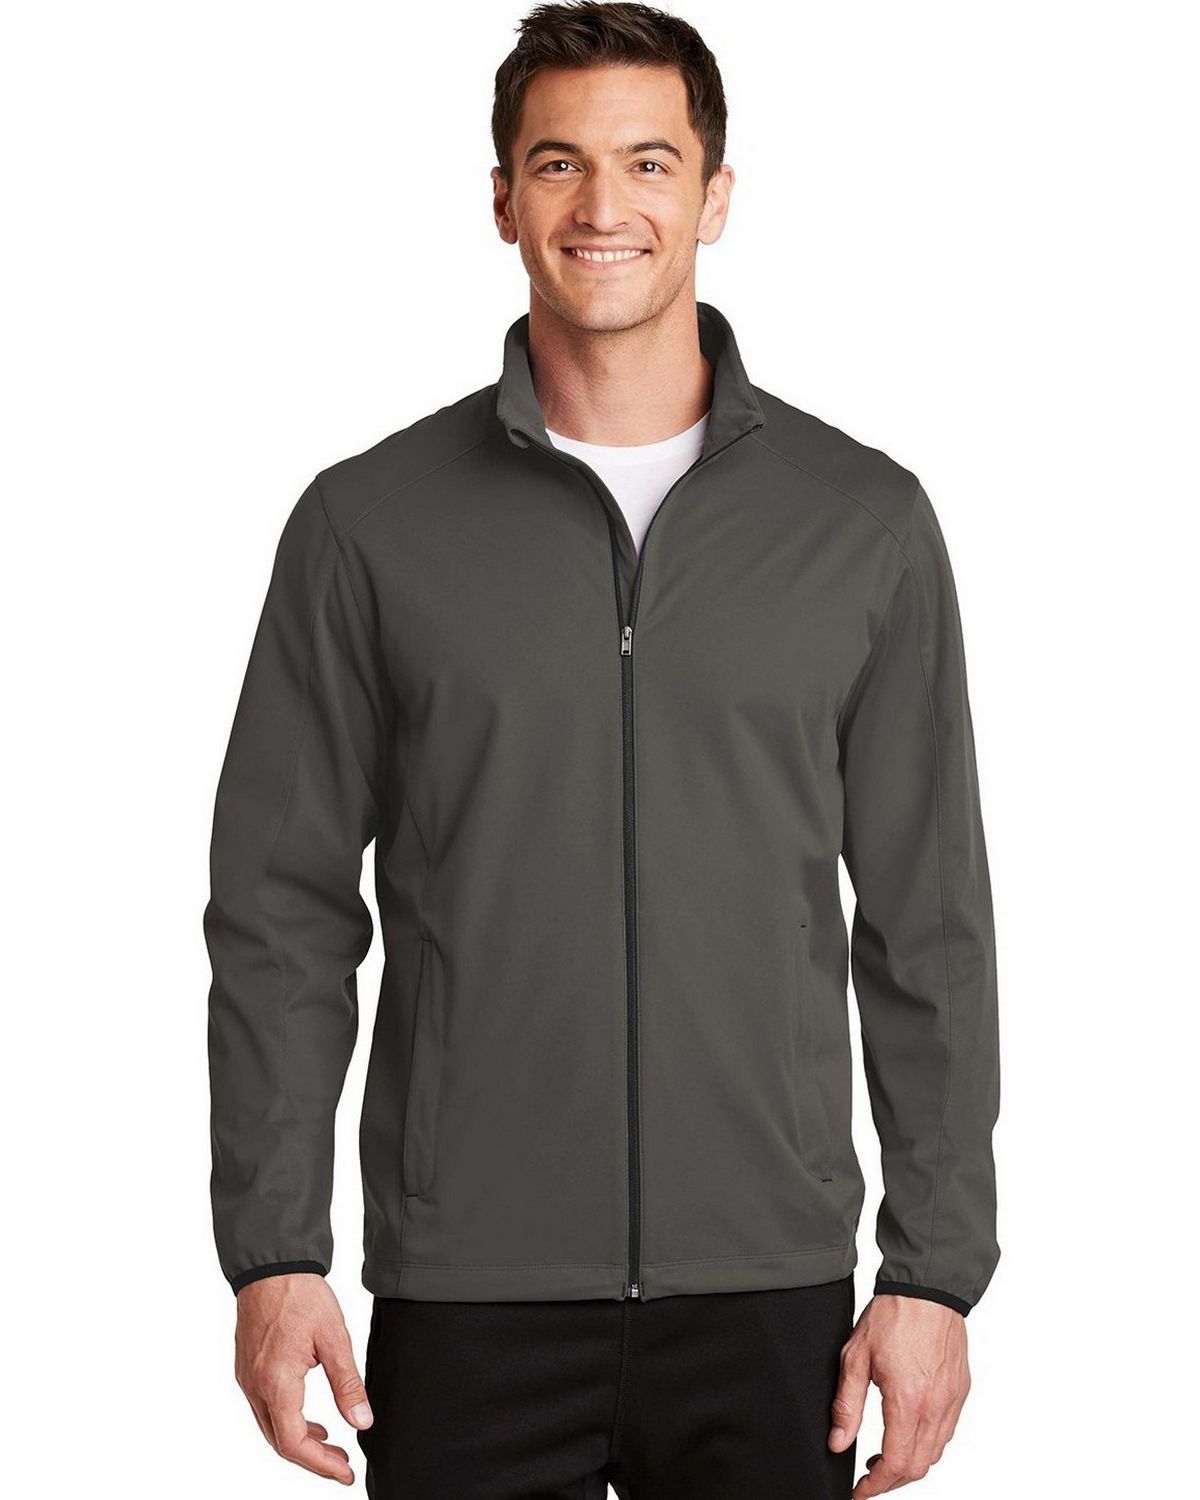 Size Chart for Port Authority J717 Active Soft Shell Jacket